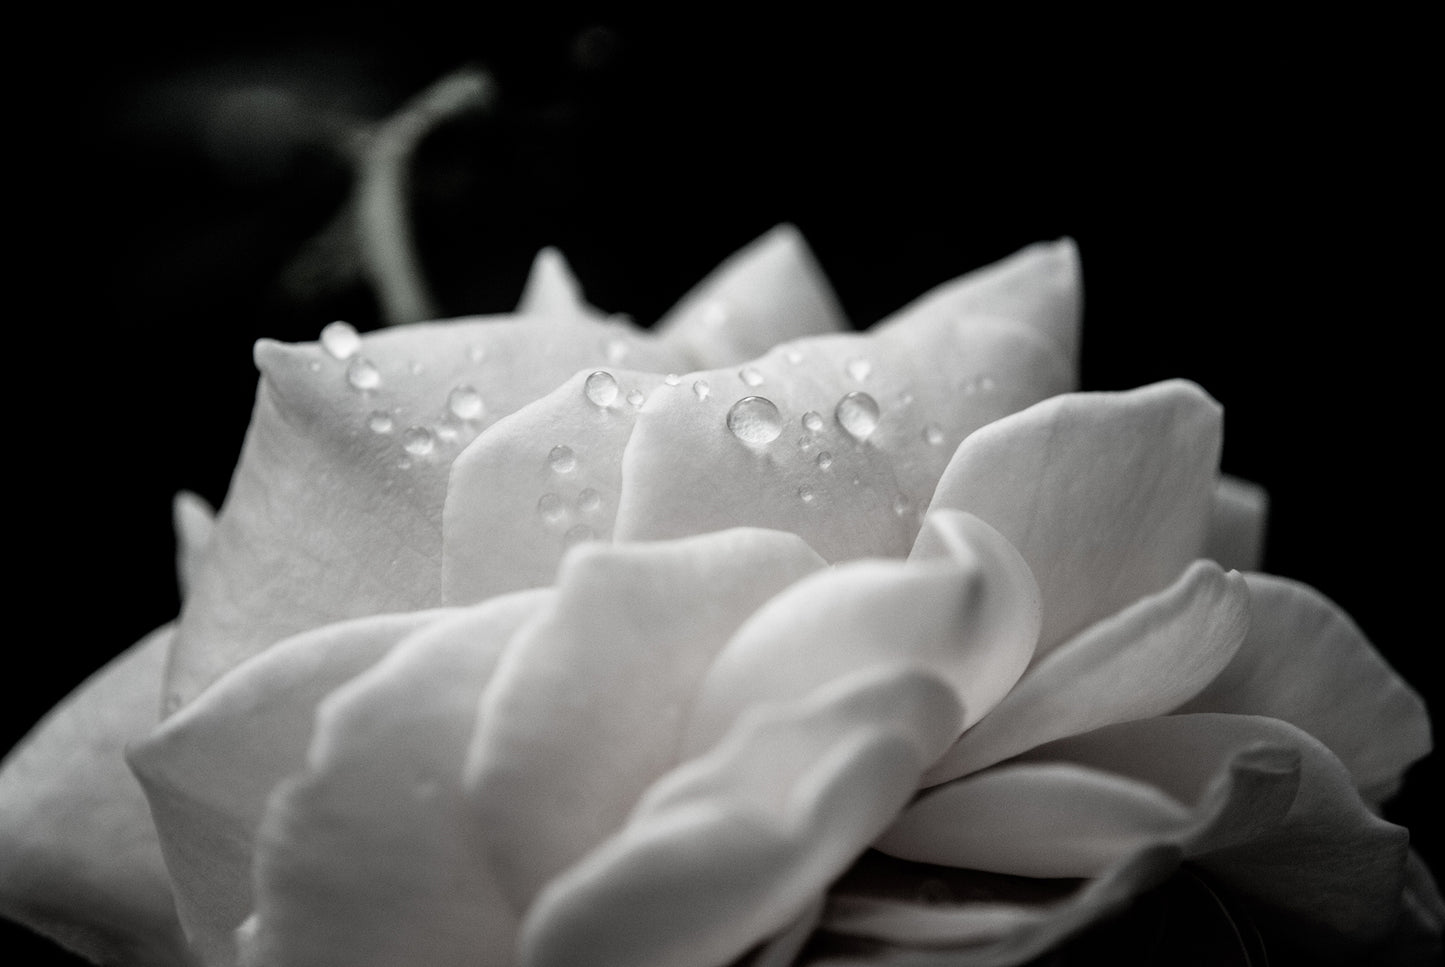 Hallway Canvas Art: Delicate Rose with Water Droplets - Black and White - Nature / Floral Photo Fine Art Canvas Wall Art Prints  - PIPAFINEART